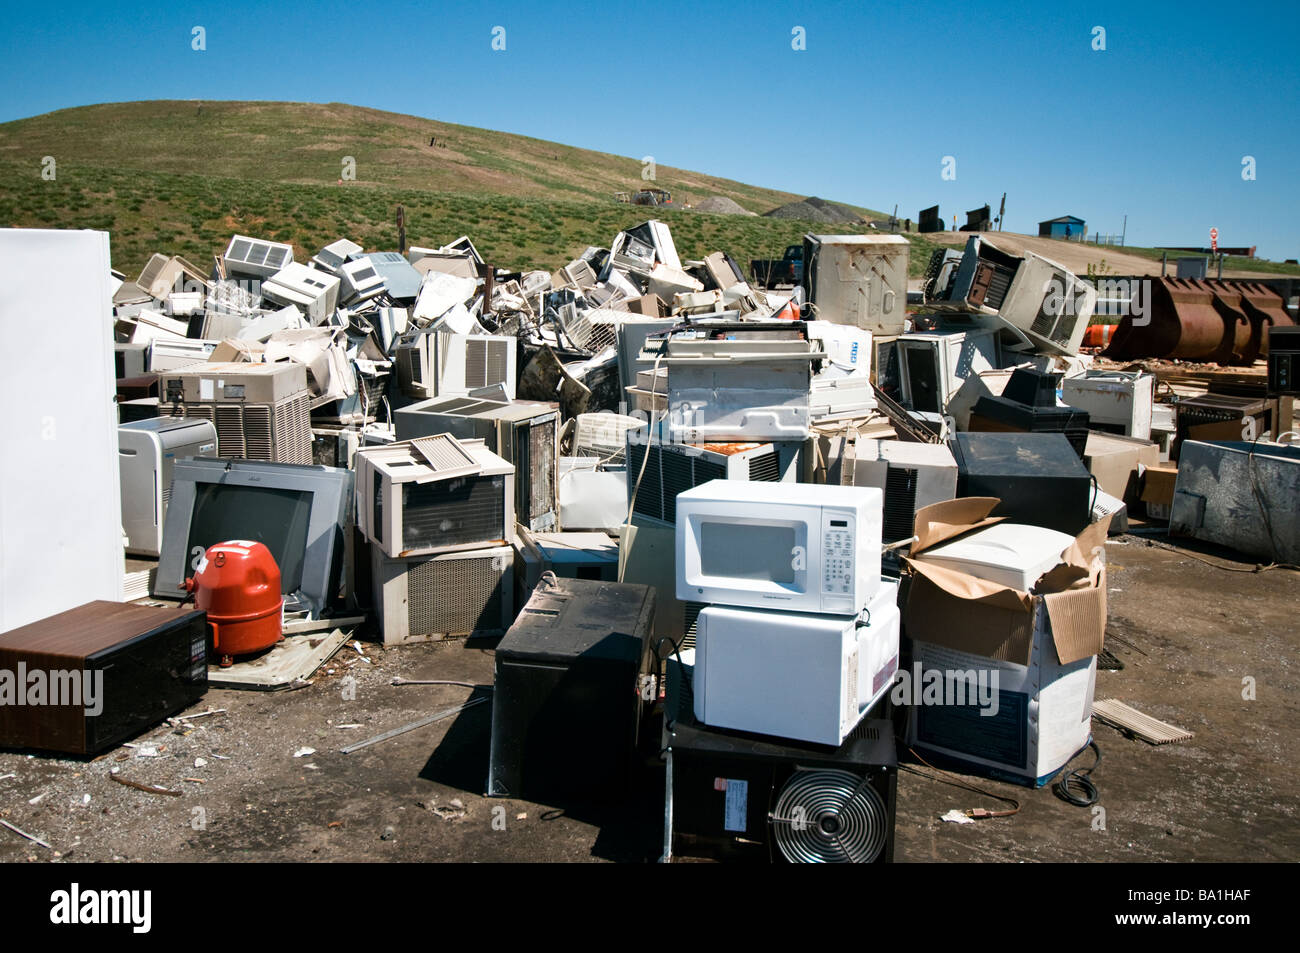 Microwave ovens and air conditioners stacked and ready for recycling at the Prince William County landfill / dump, Virginia USA Stock Photo